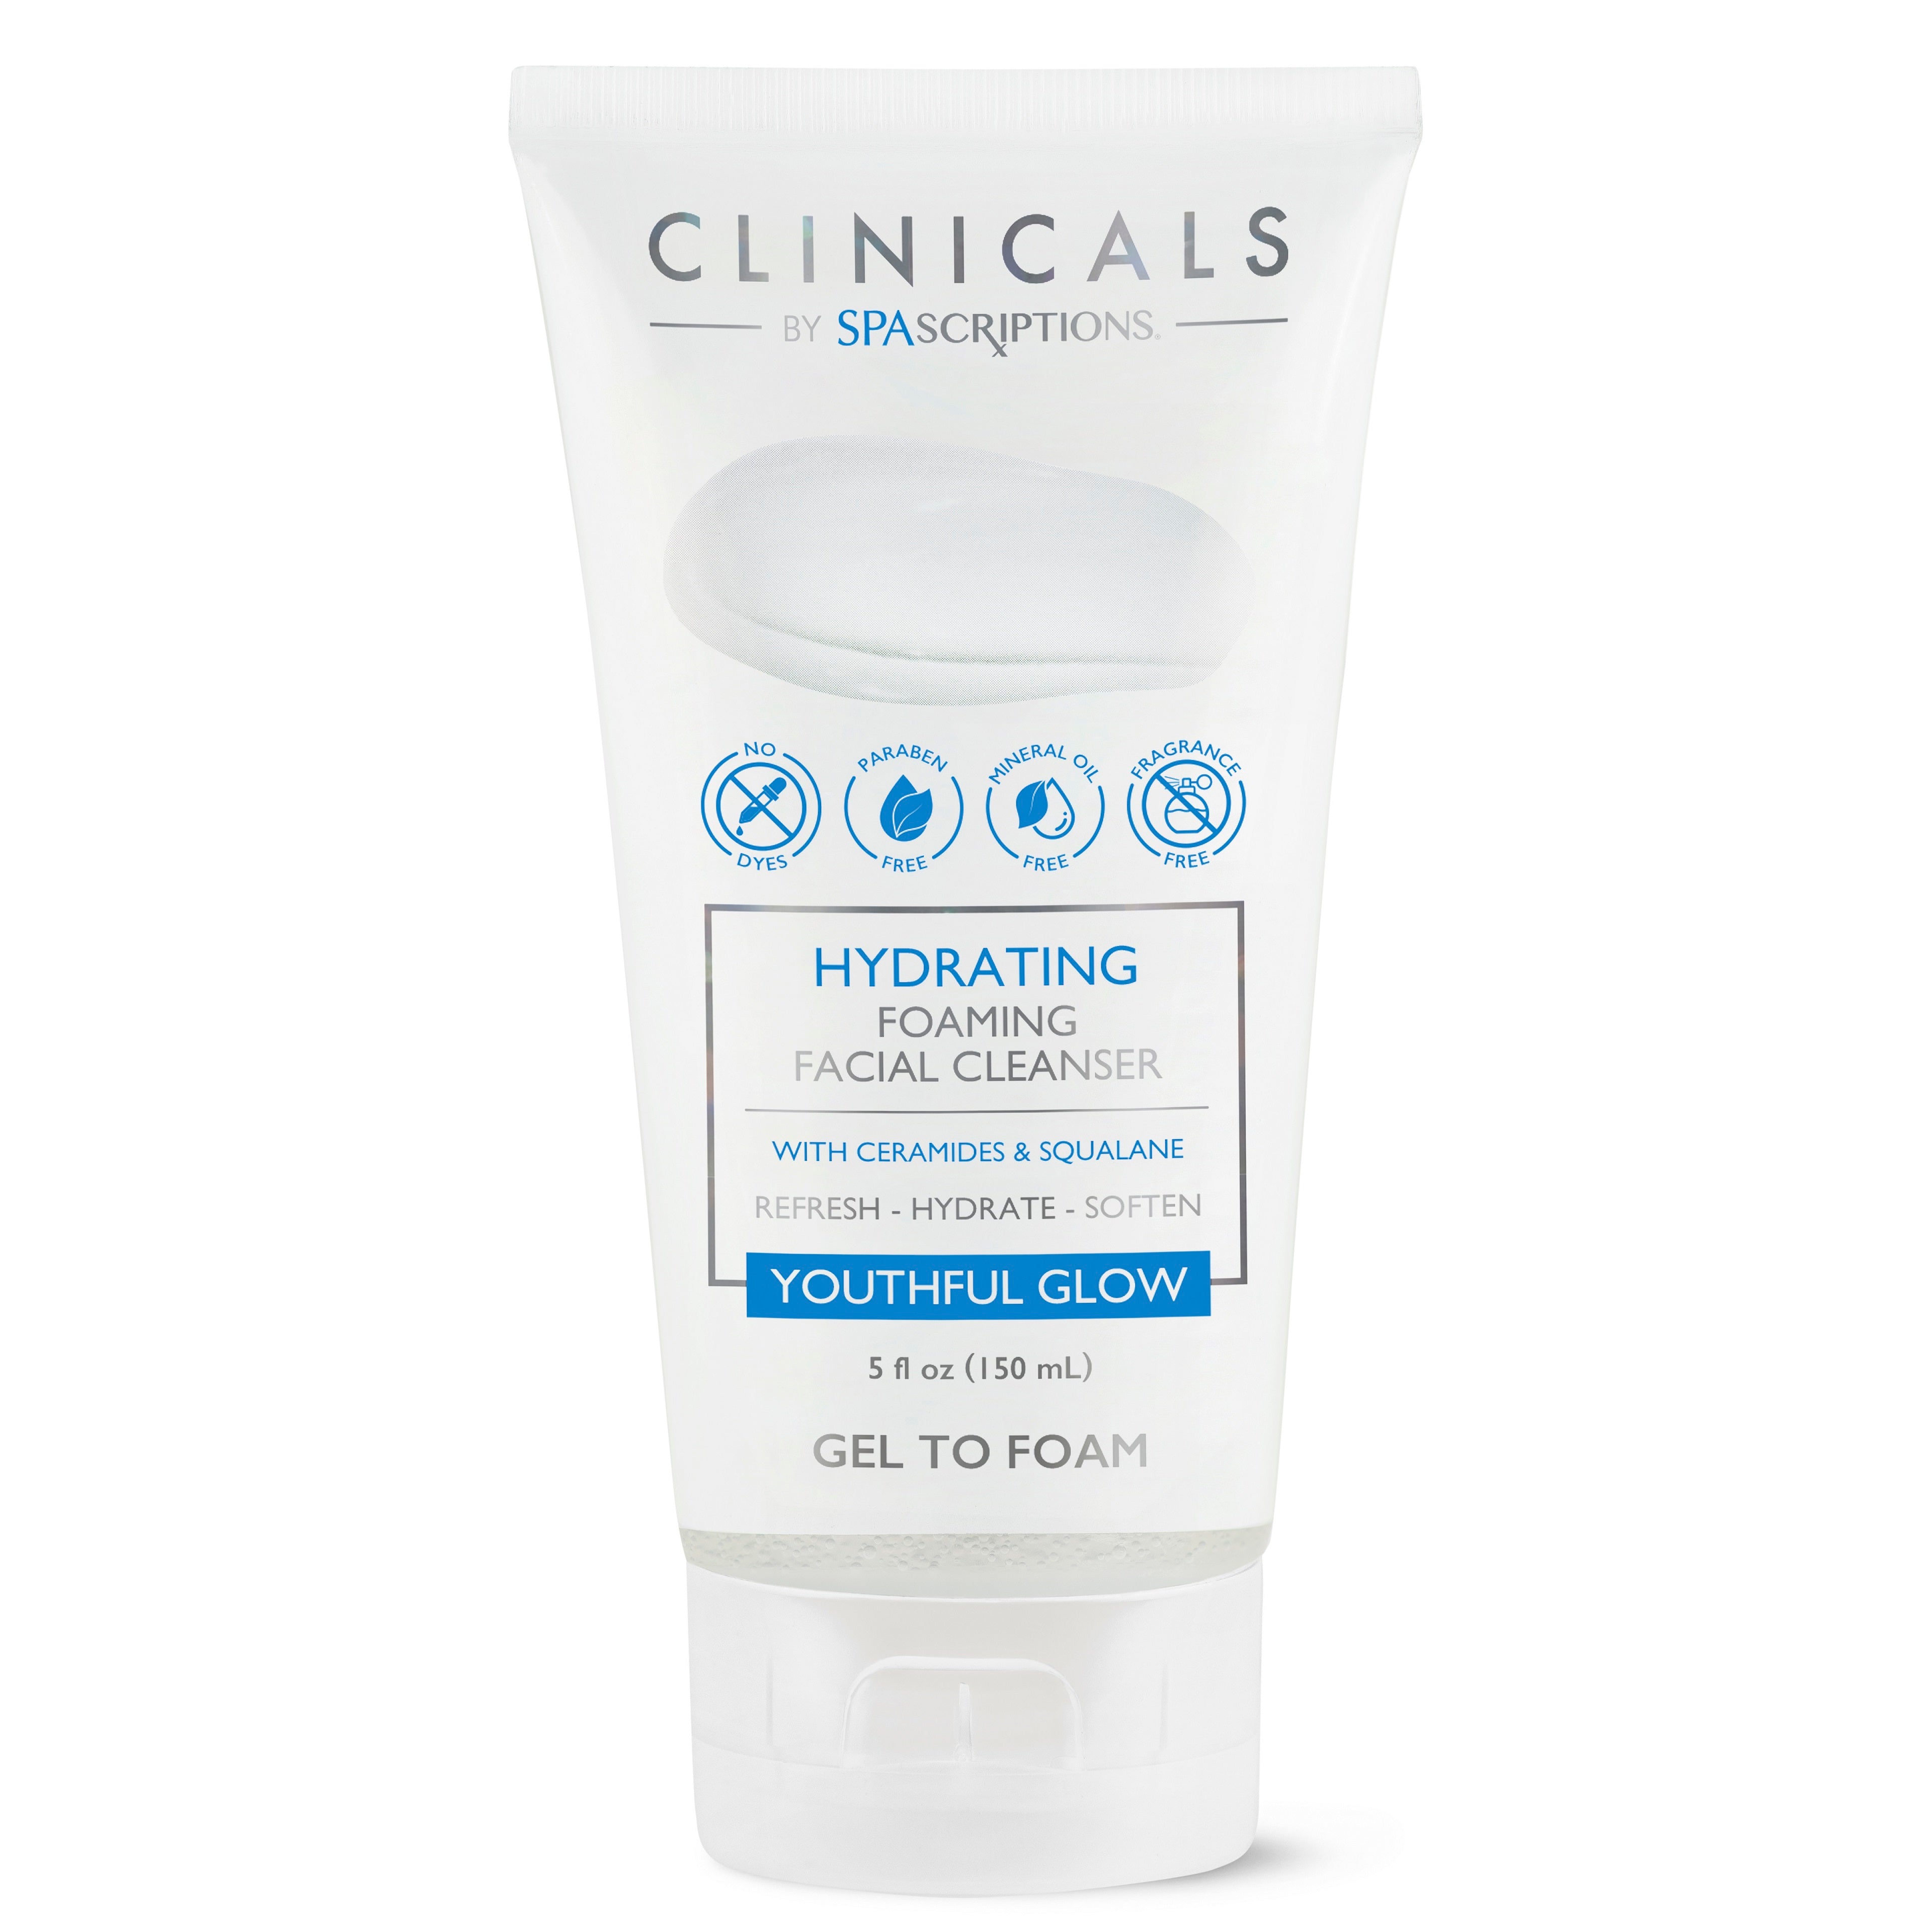 Clinicals Hydrating Foaming Facial Cleanser